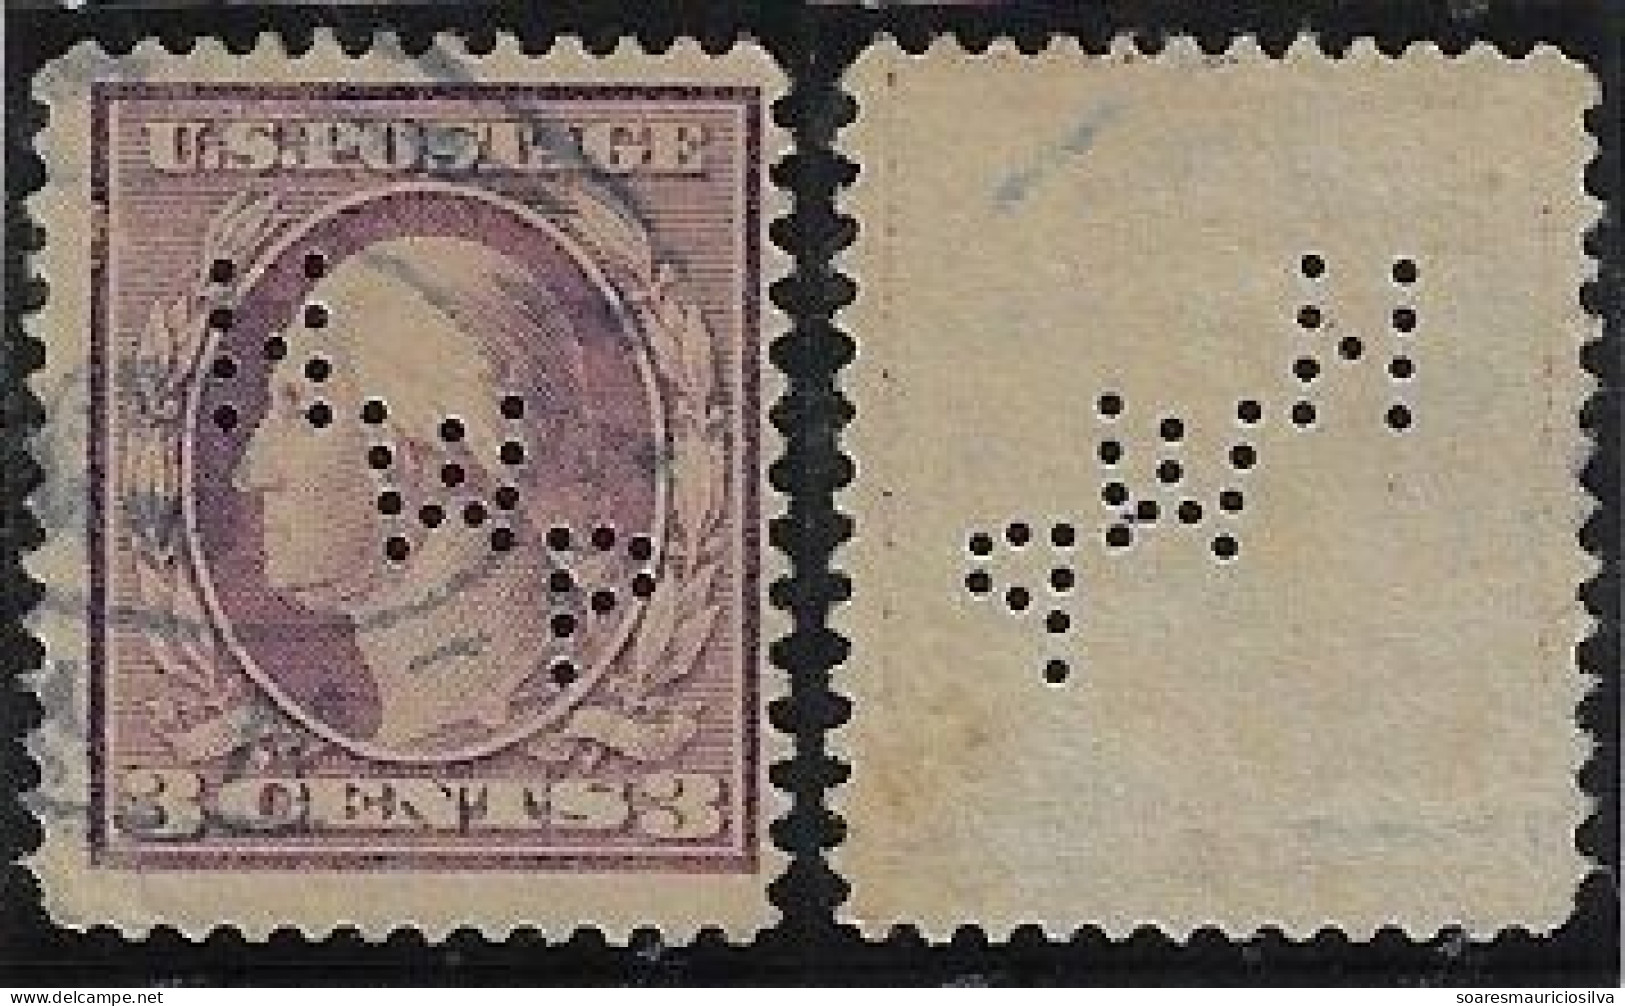 USA United States 1902/1926 Stamp With Perfin HWP By Henry W. Peabody Company From New York Lochung Perfore - Zähnungen (Perfins)